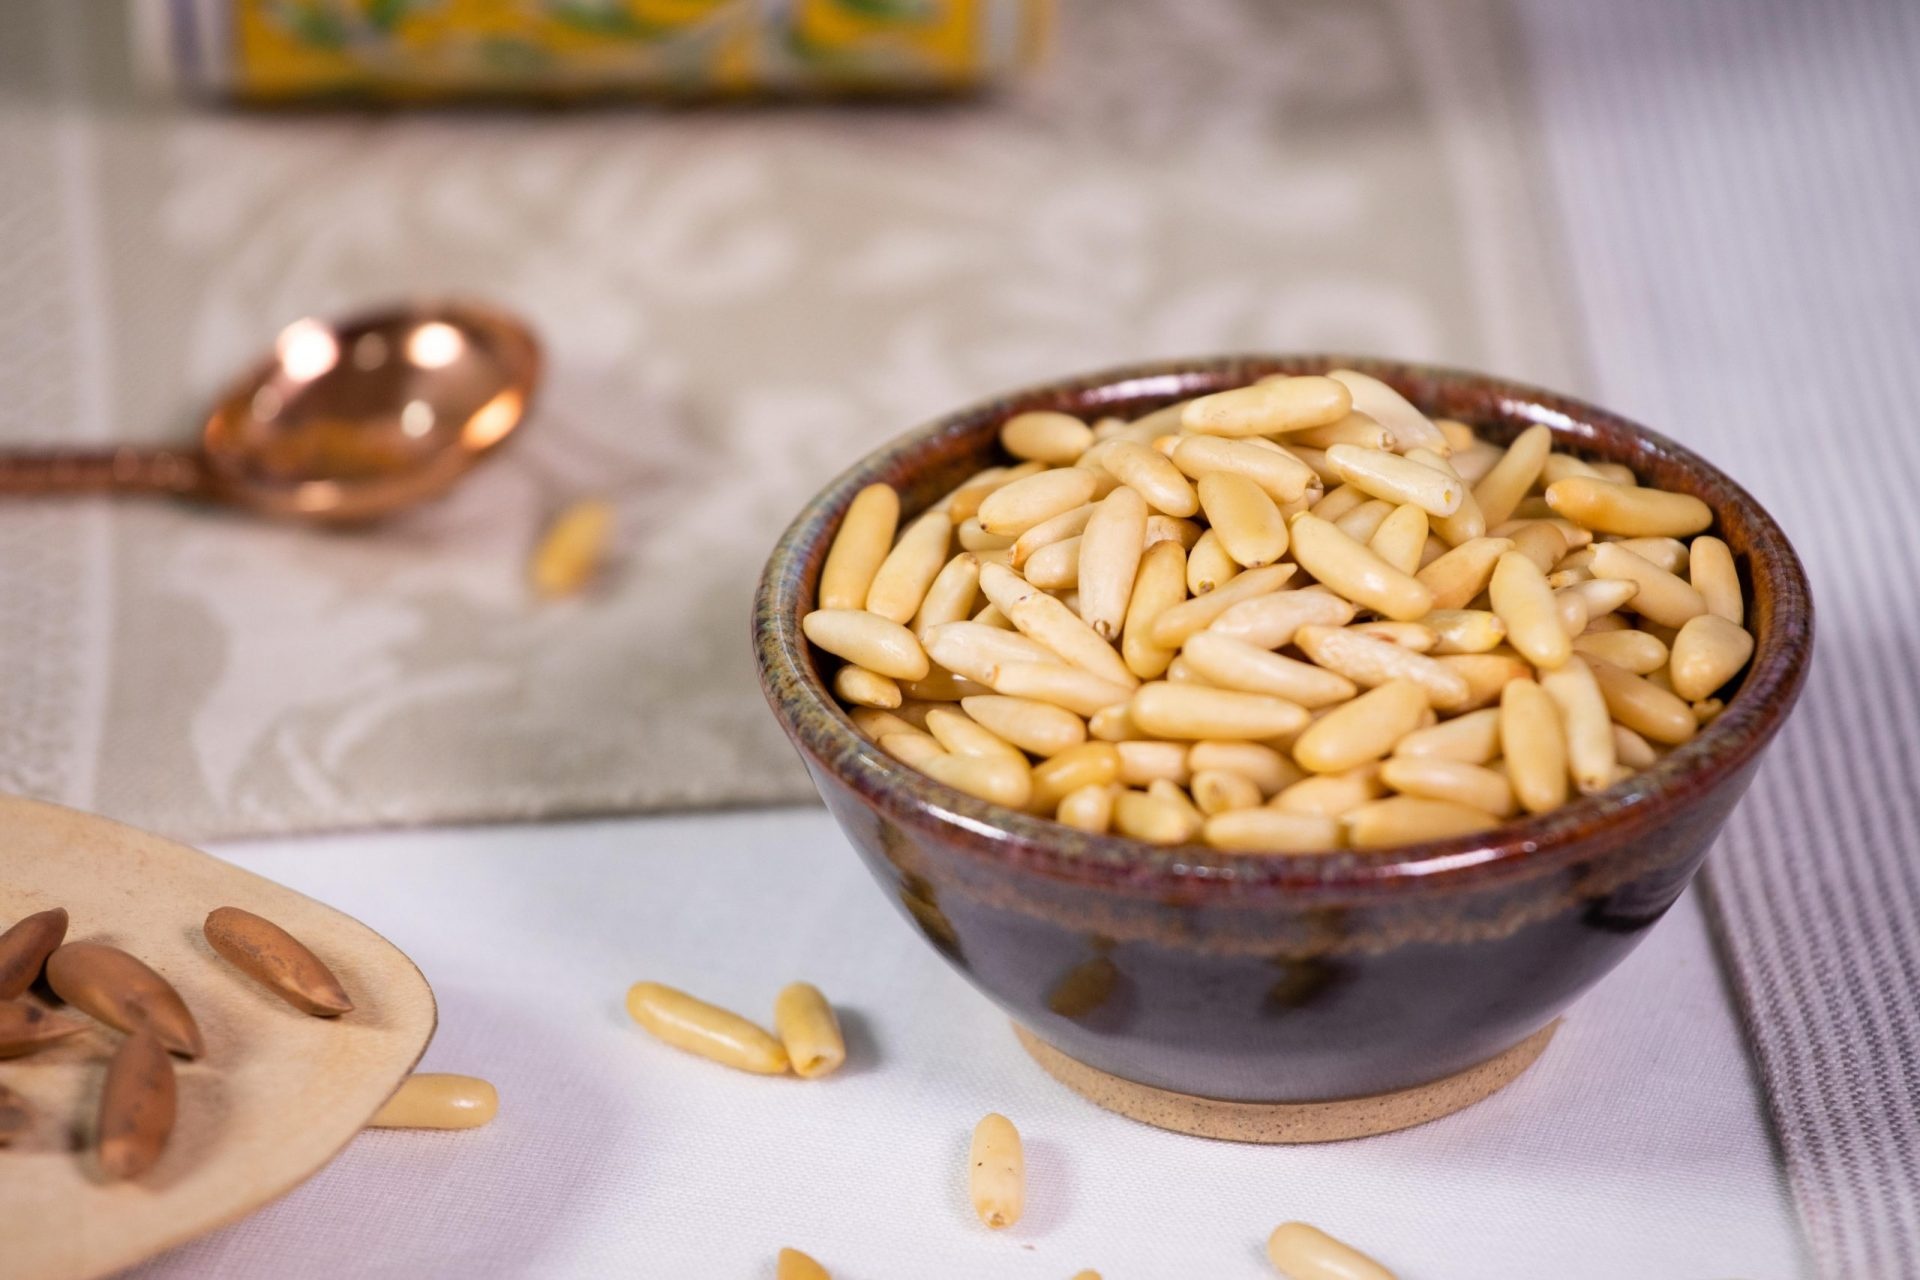 Shell-free pine nuts, Easy snacking, Goingnuts trading, Indian imports, 1920x1280 HD Desktop